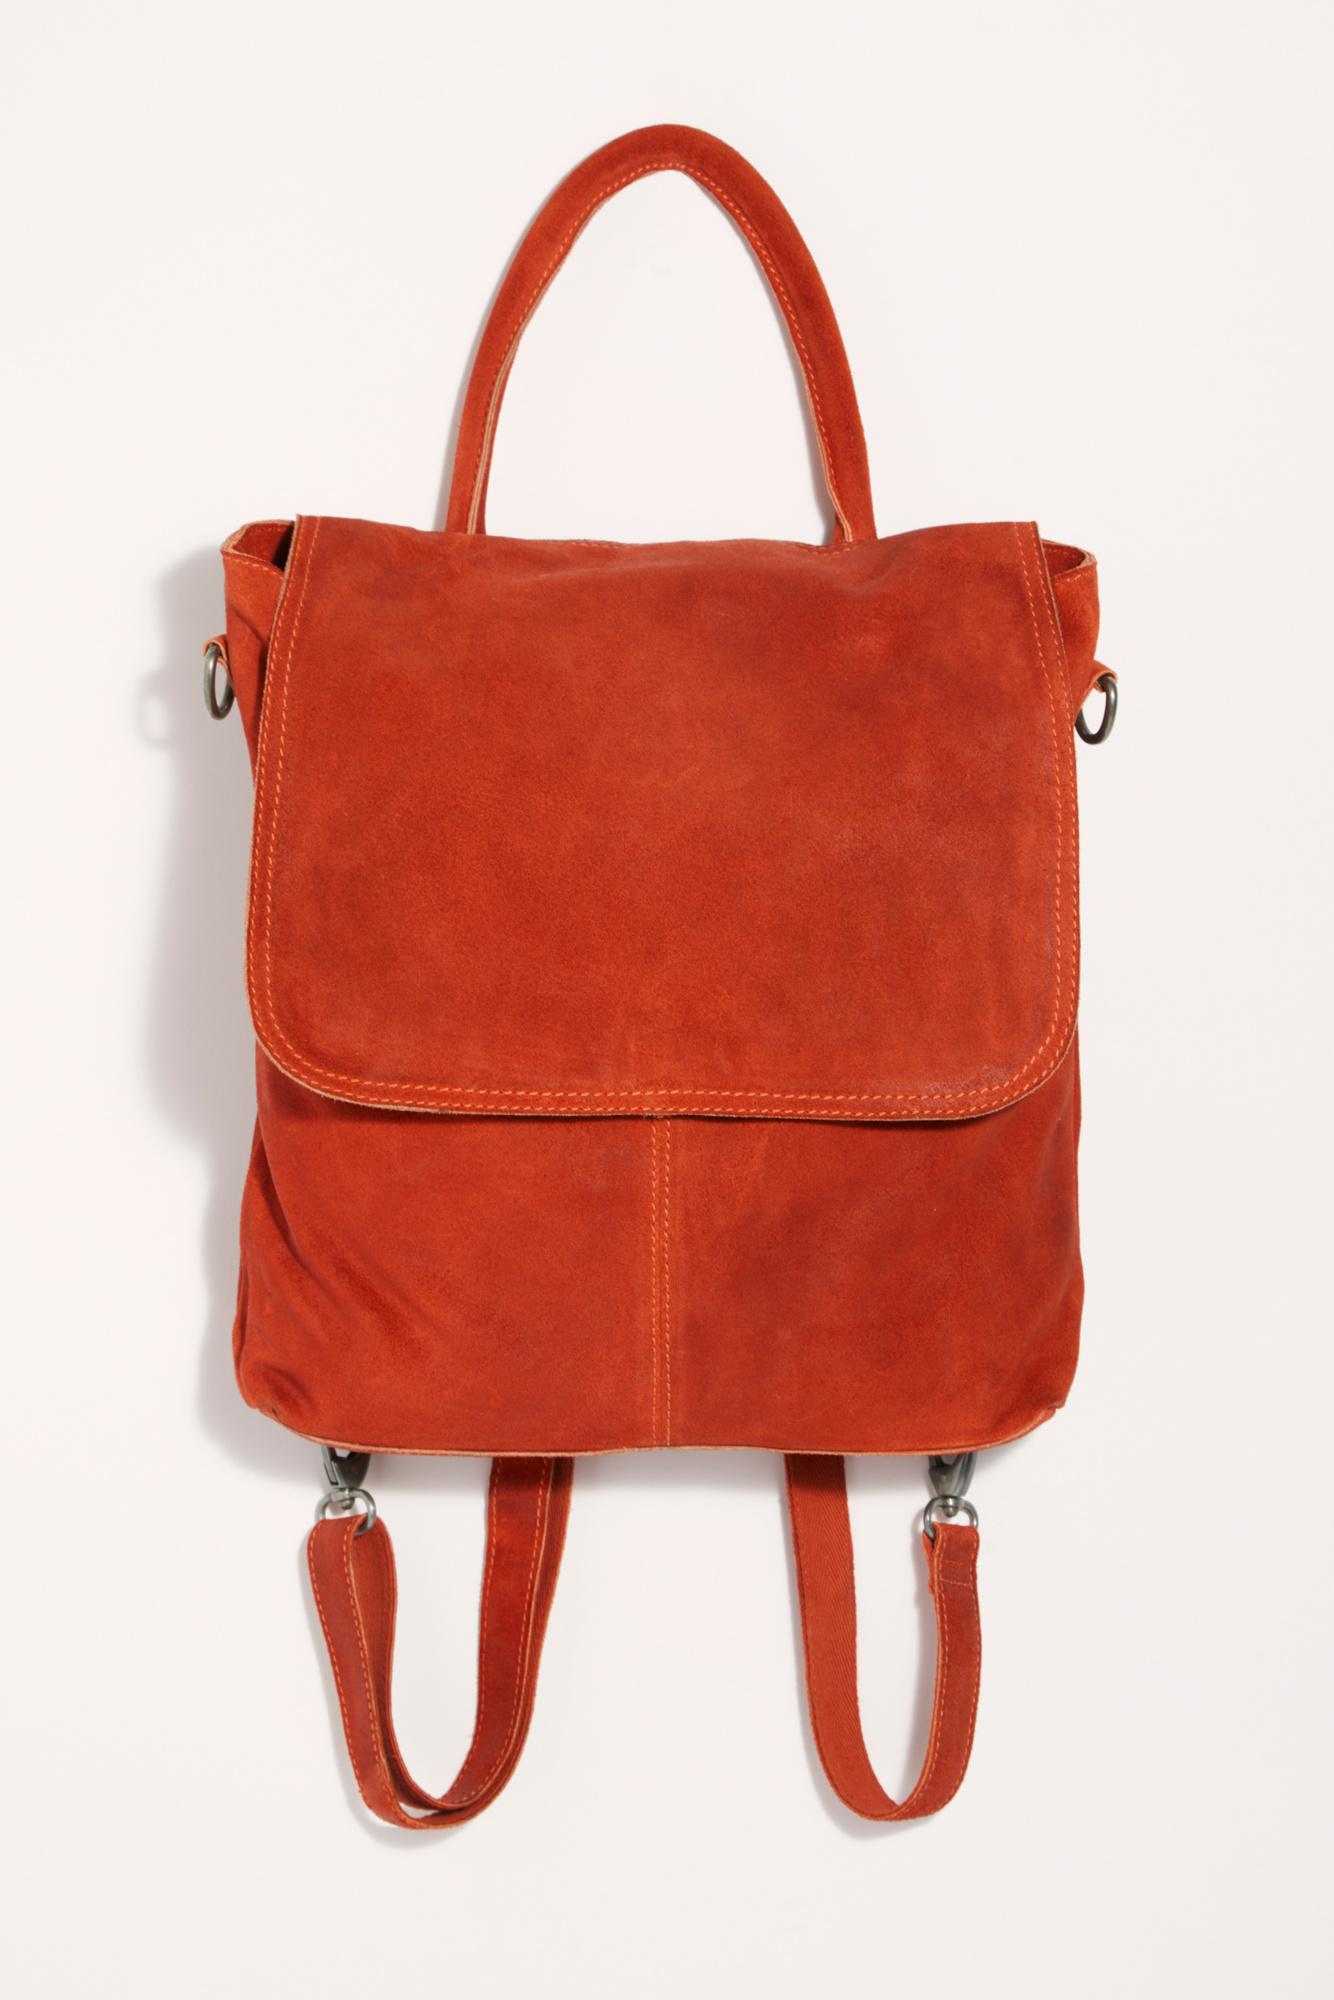 Free People We The Free Paris Convertible Backpack in Red